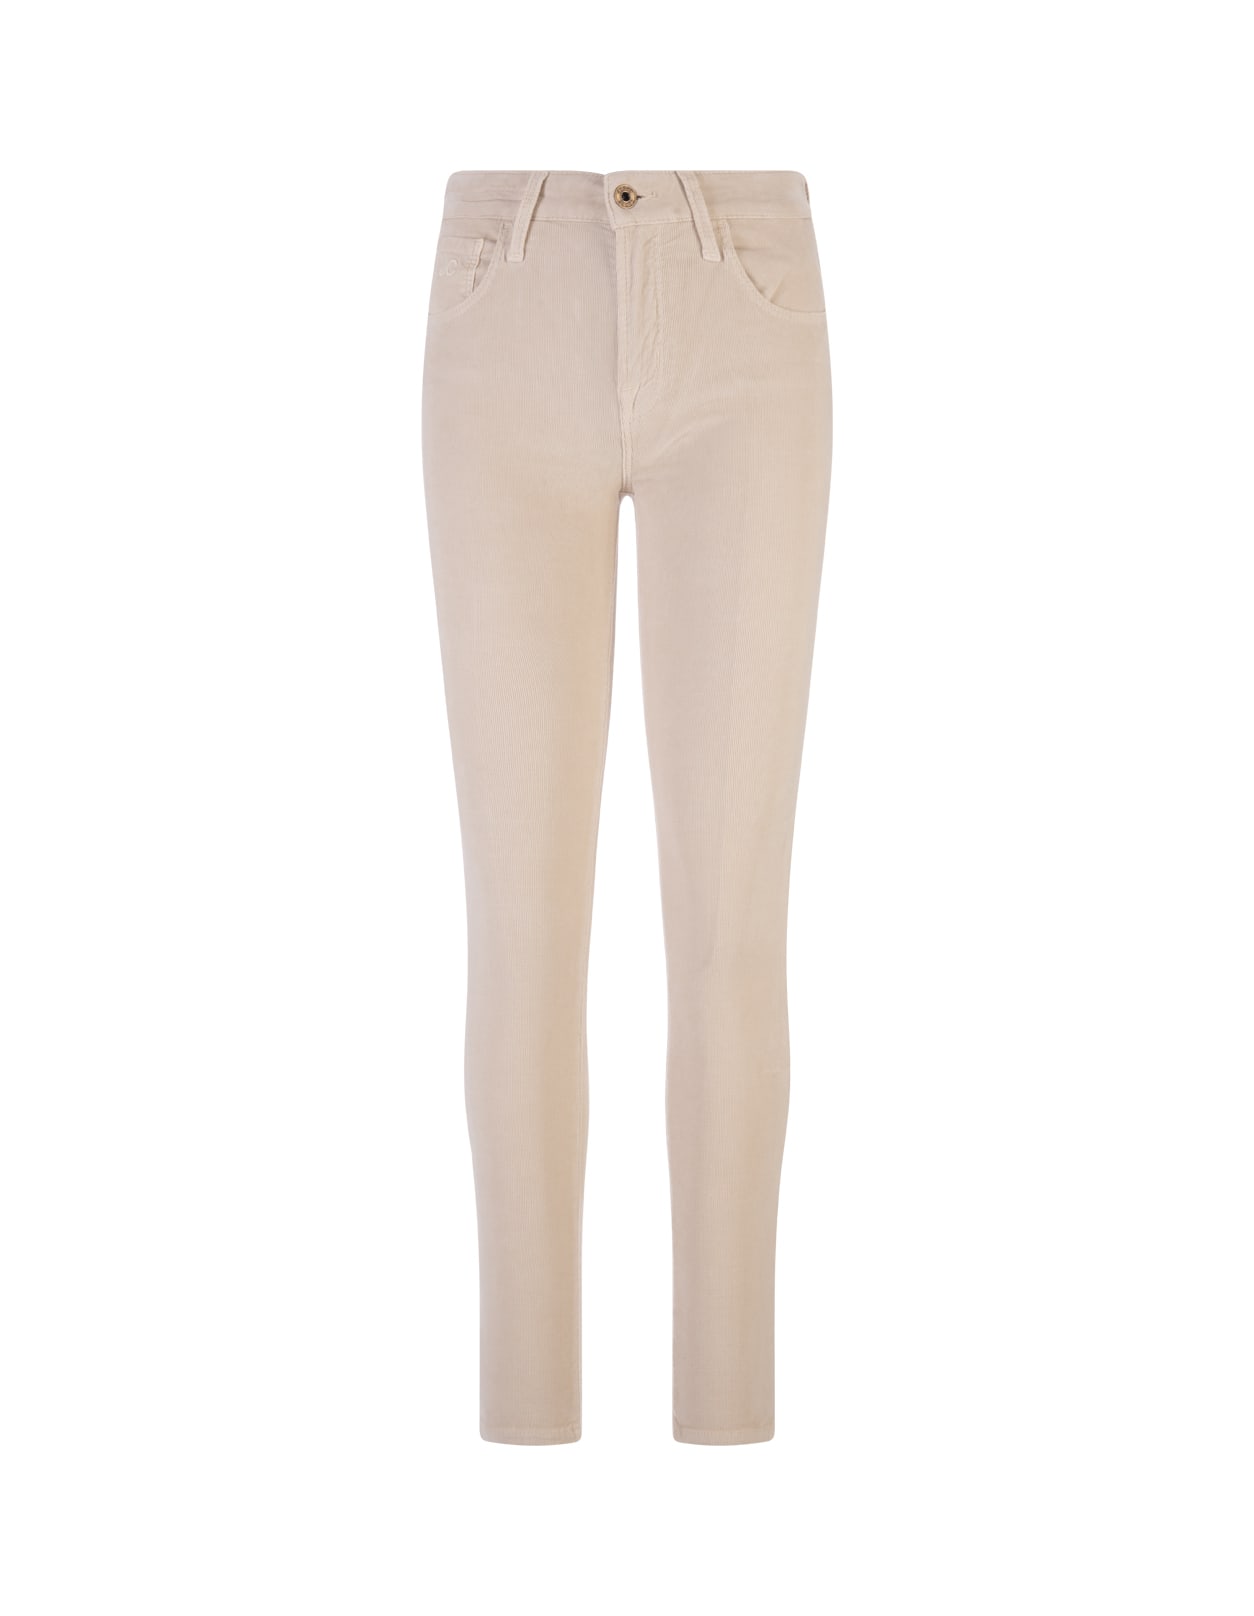 Jacob Cohen Kimberly Skinny Fit Jeans In Beige Corduroy